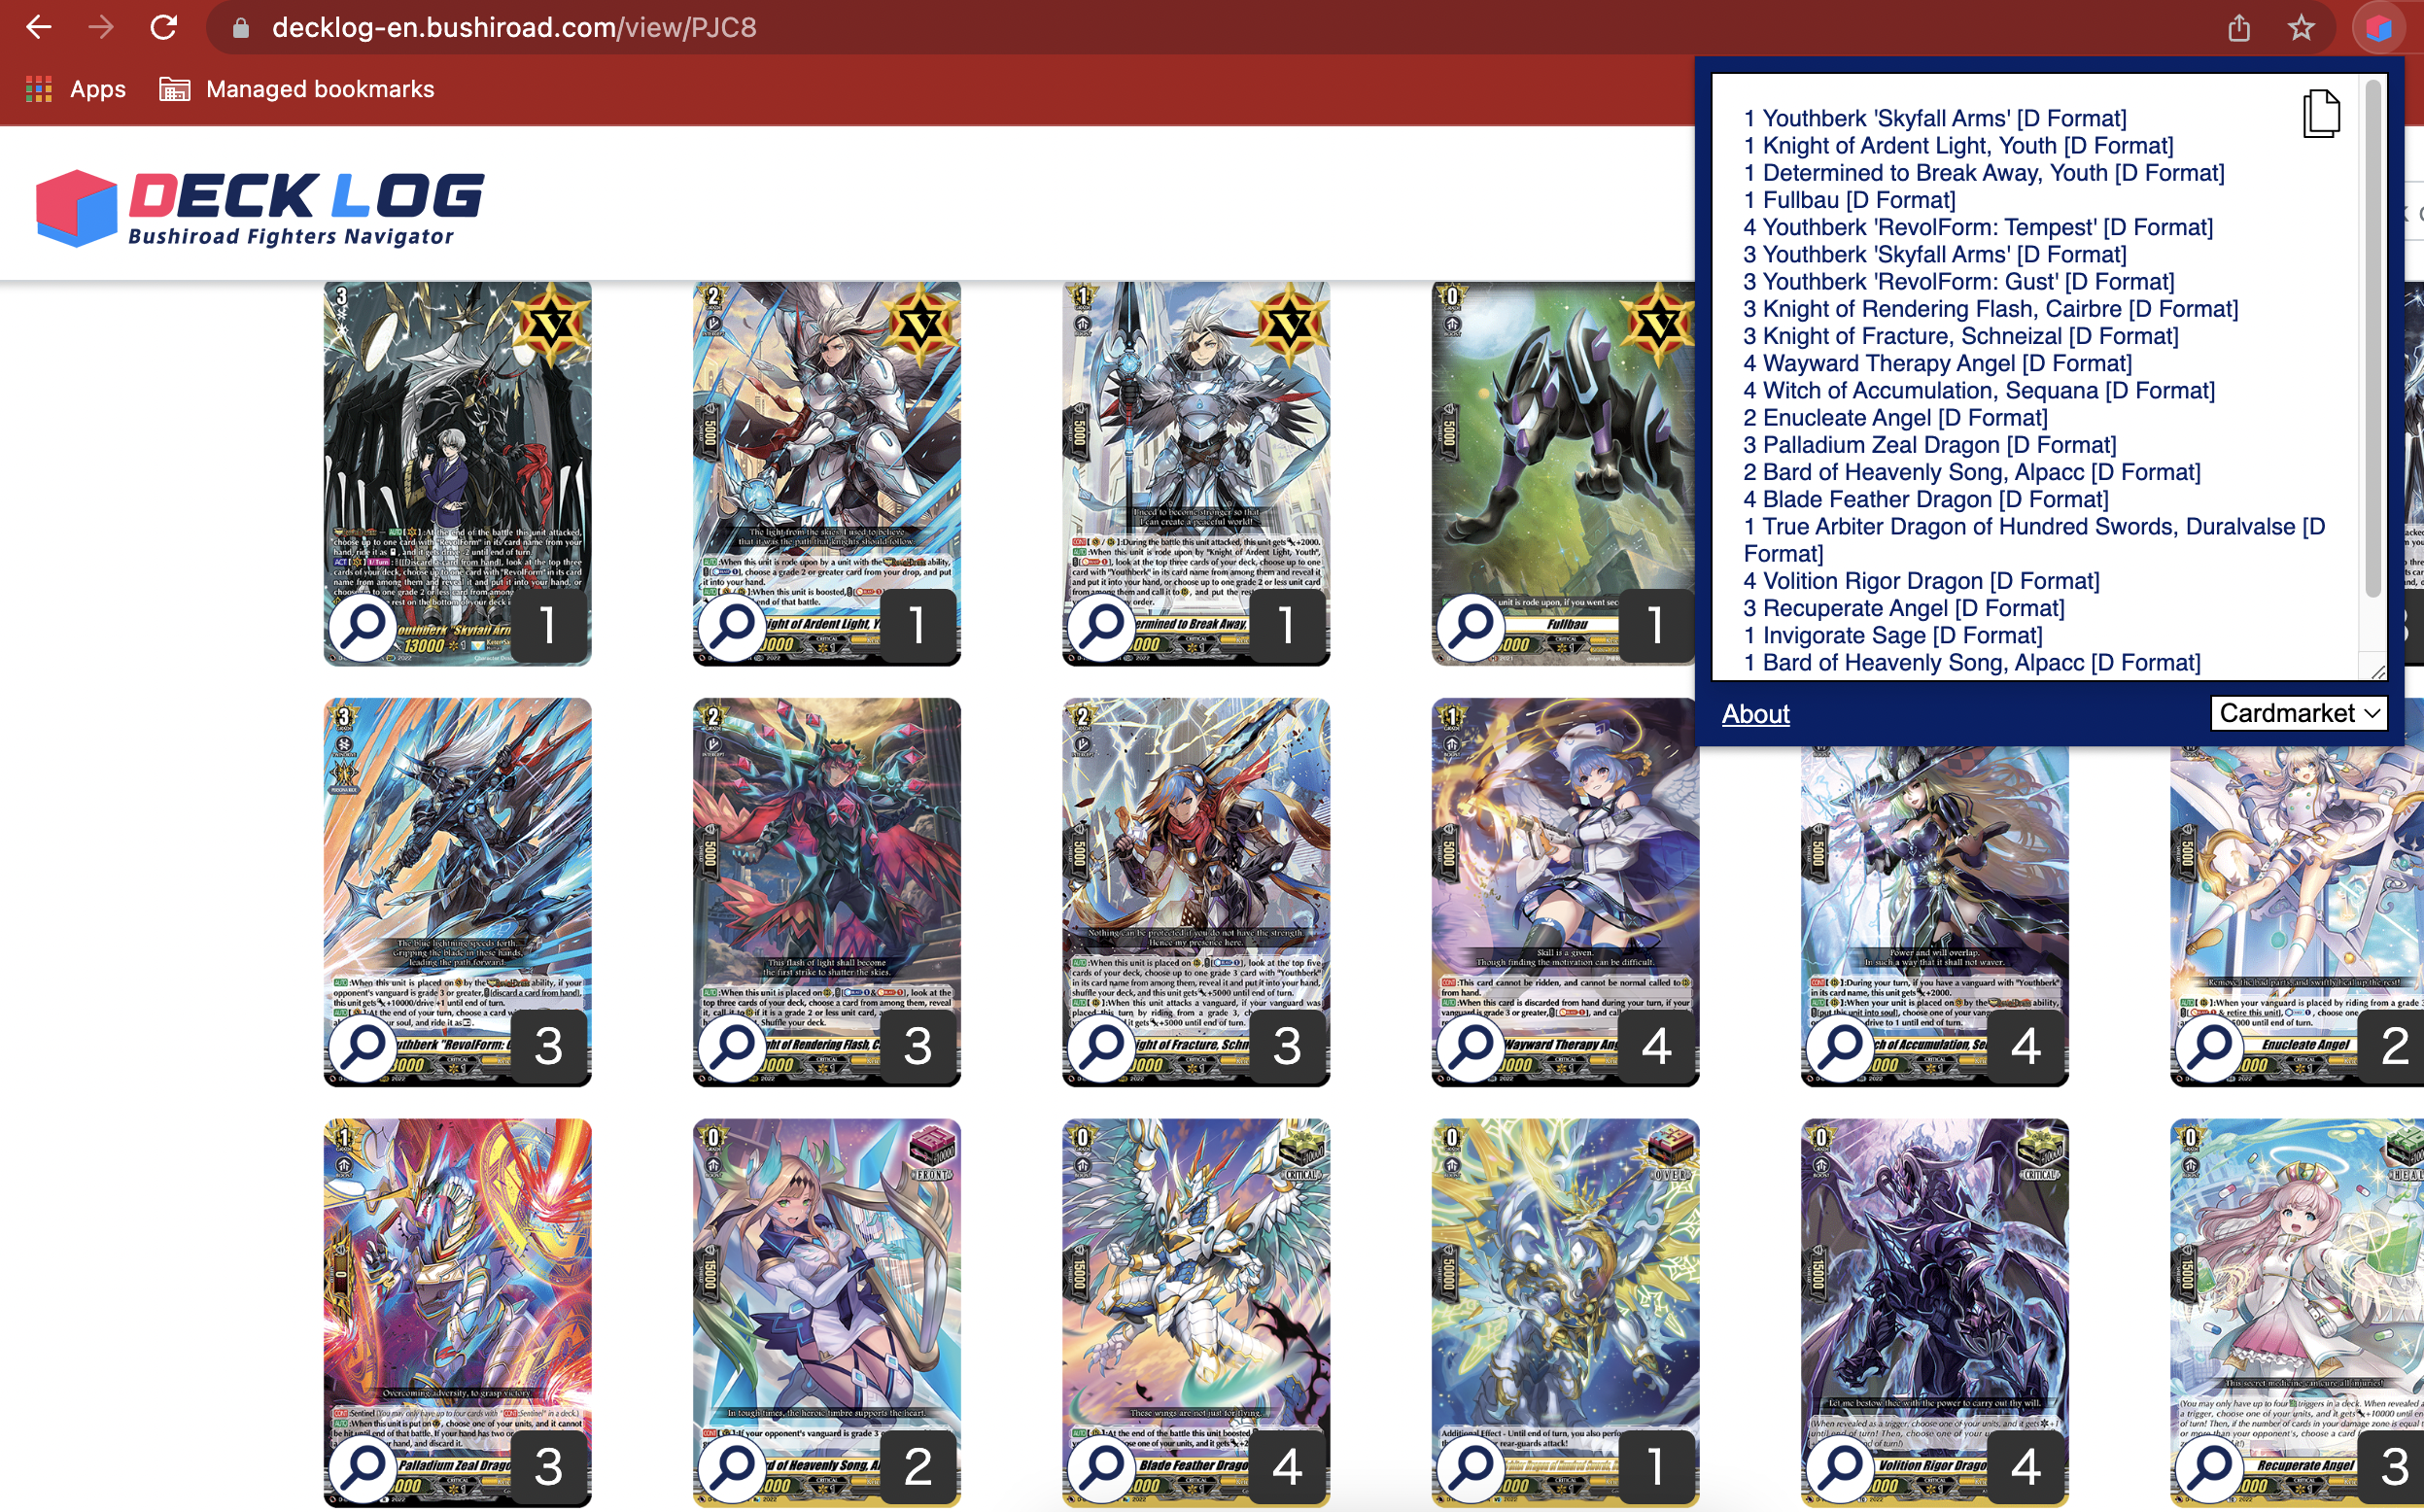 Chrome extension to export Cardfight!! Vanguard decks in a single click